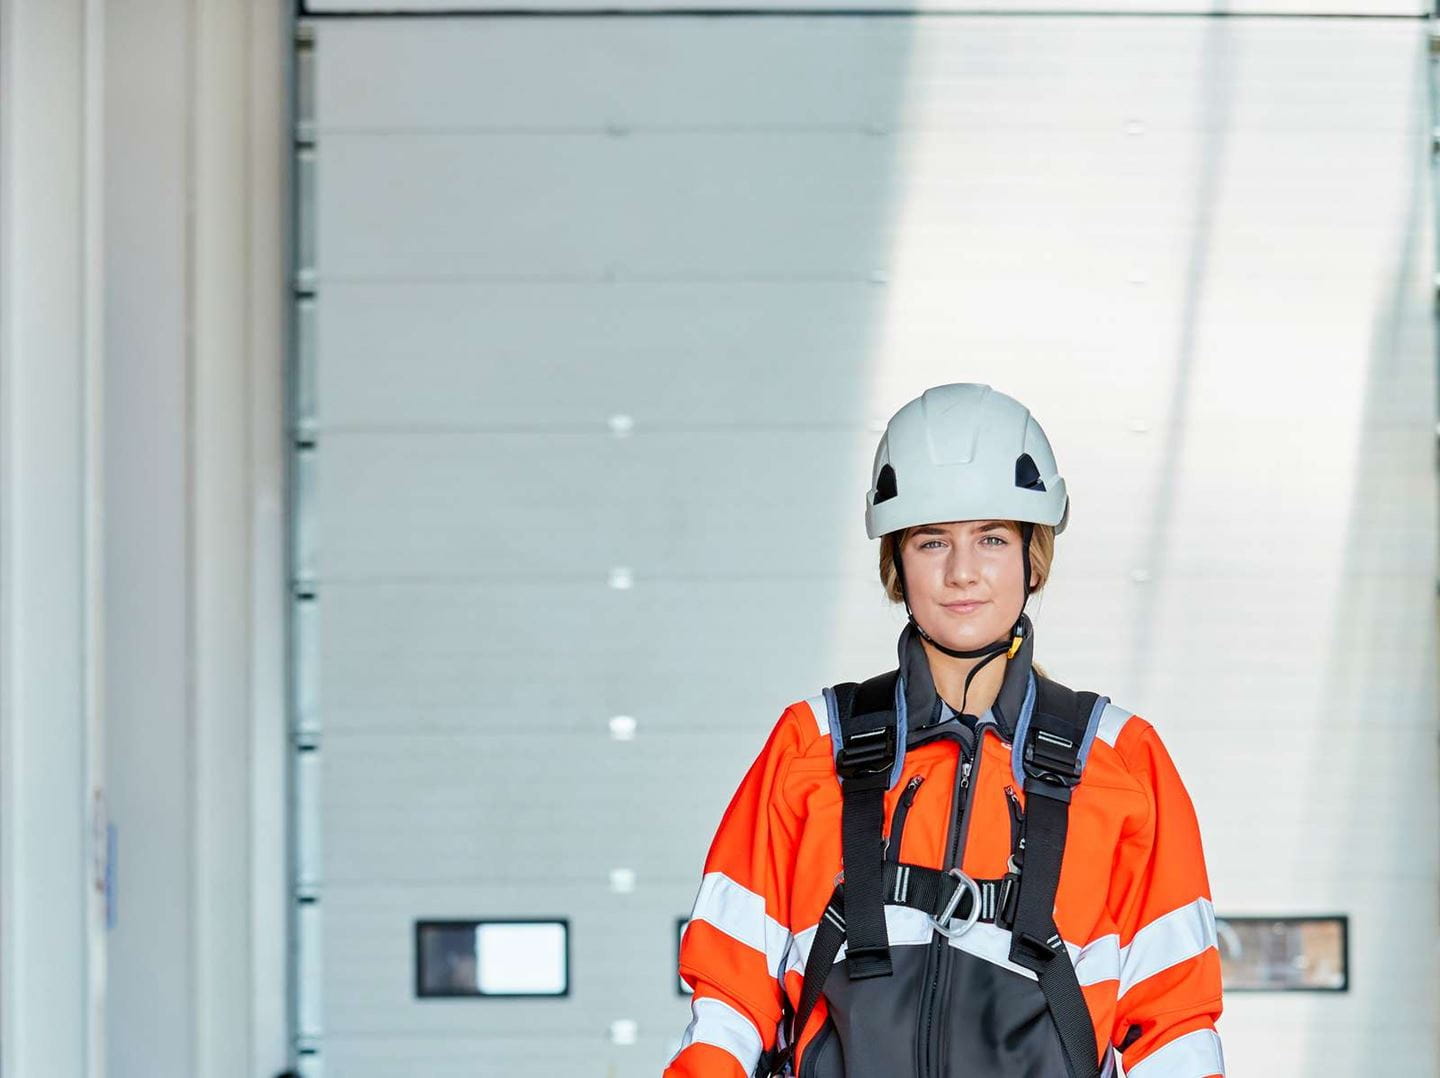 Woman in high-visibility clothing and hard hat.